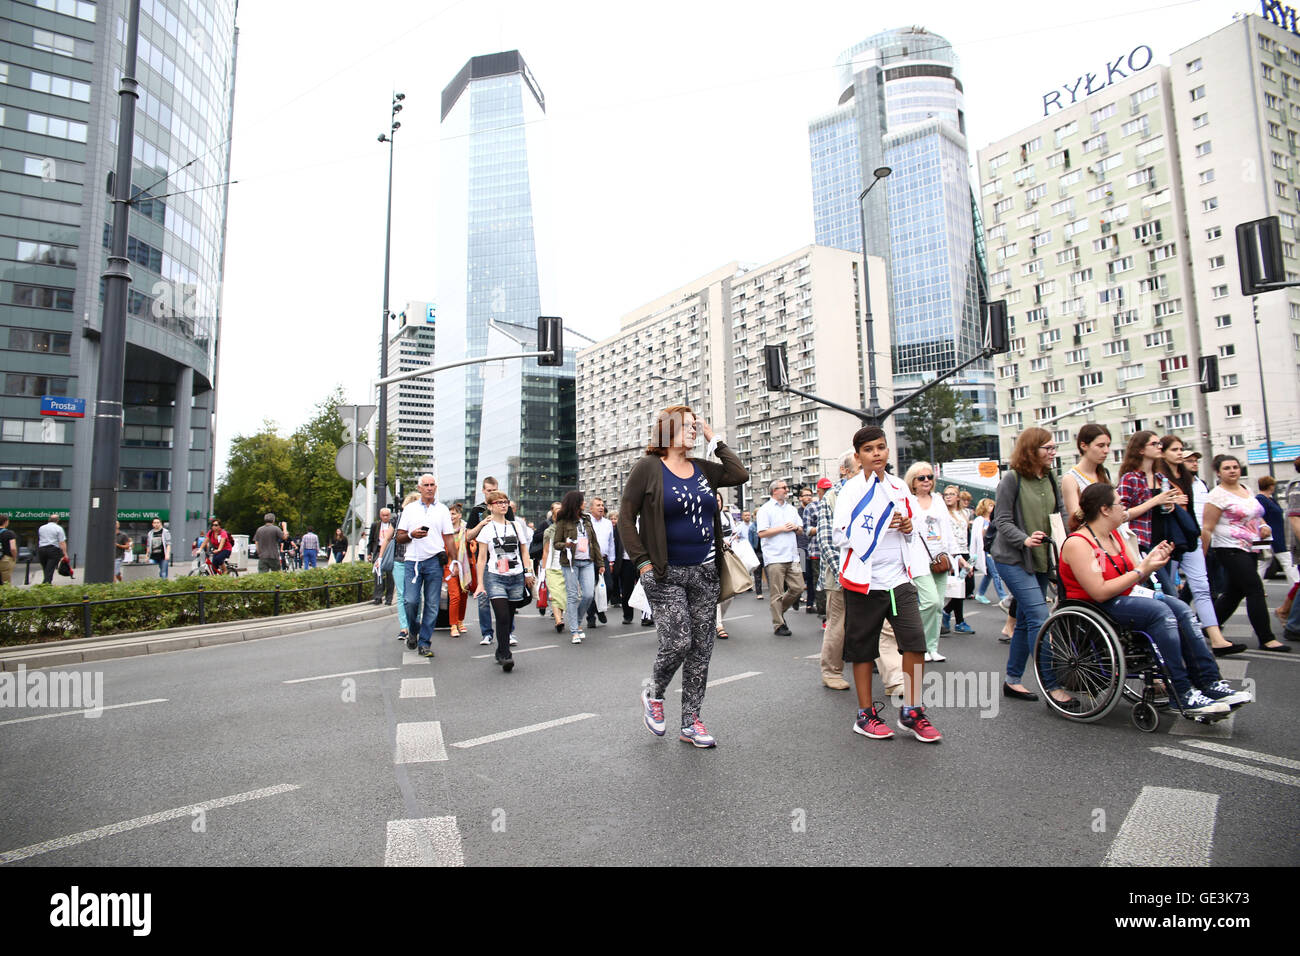 Poland, Warsaw, 22nd Uly 2016: Protesters held march in memory of murdered jews in 1942 walking around the Warsaw ghetto area of Second World War Credit: Jake Ratz/Alamy Live News Stock Photo